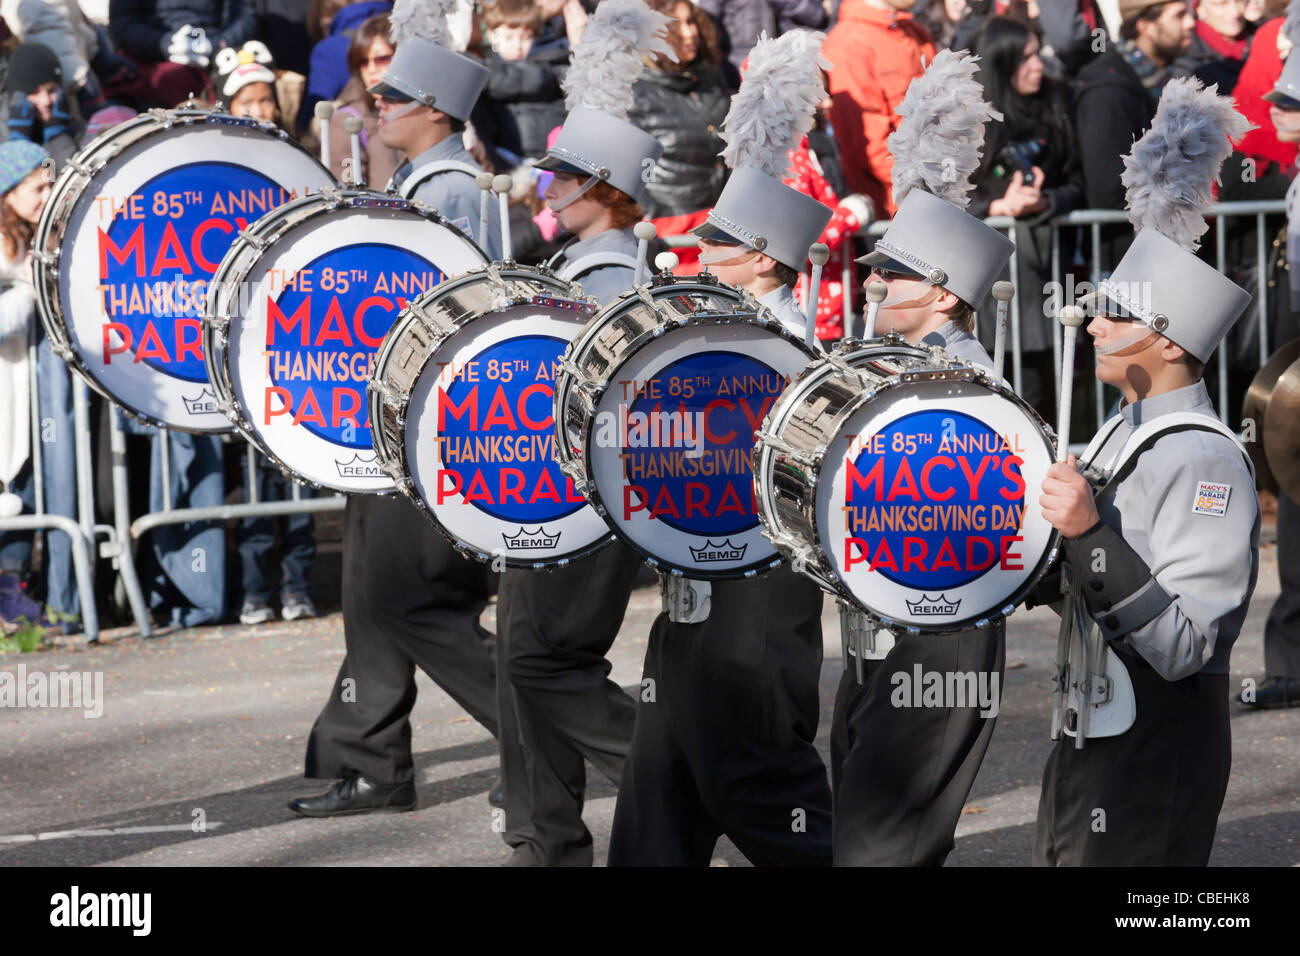 Members of the Plymouth-Canton Marching band perform during the 2011 Macy's Thanksgiving Day Parade in New York City. Stock Photo